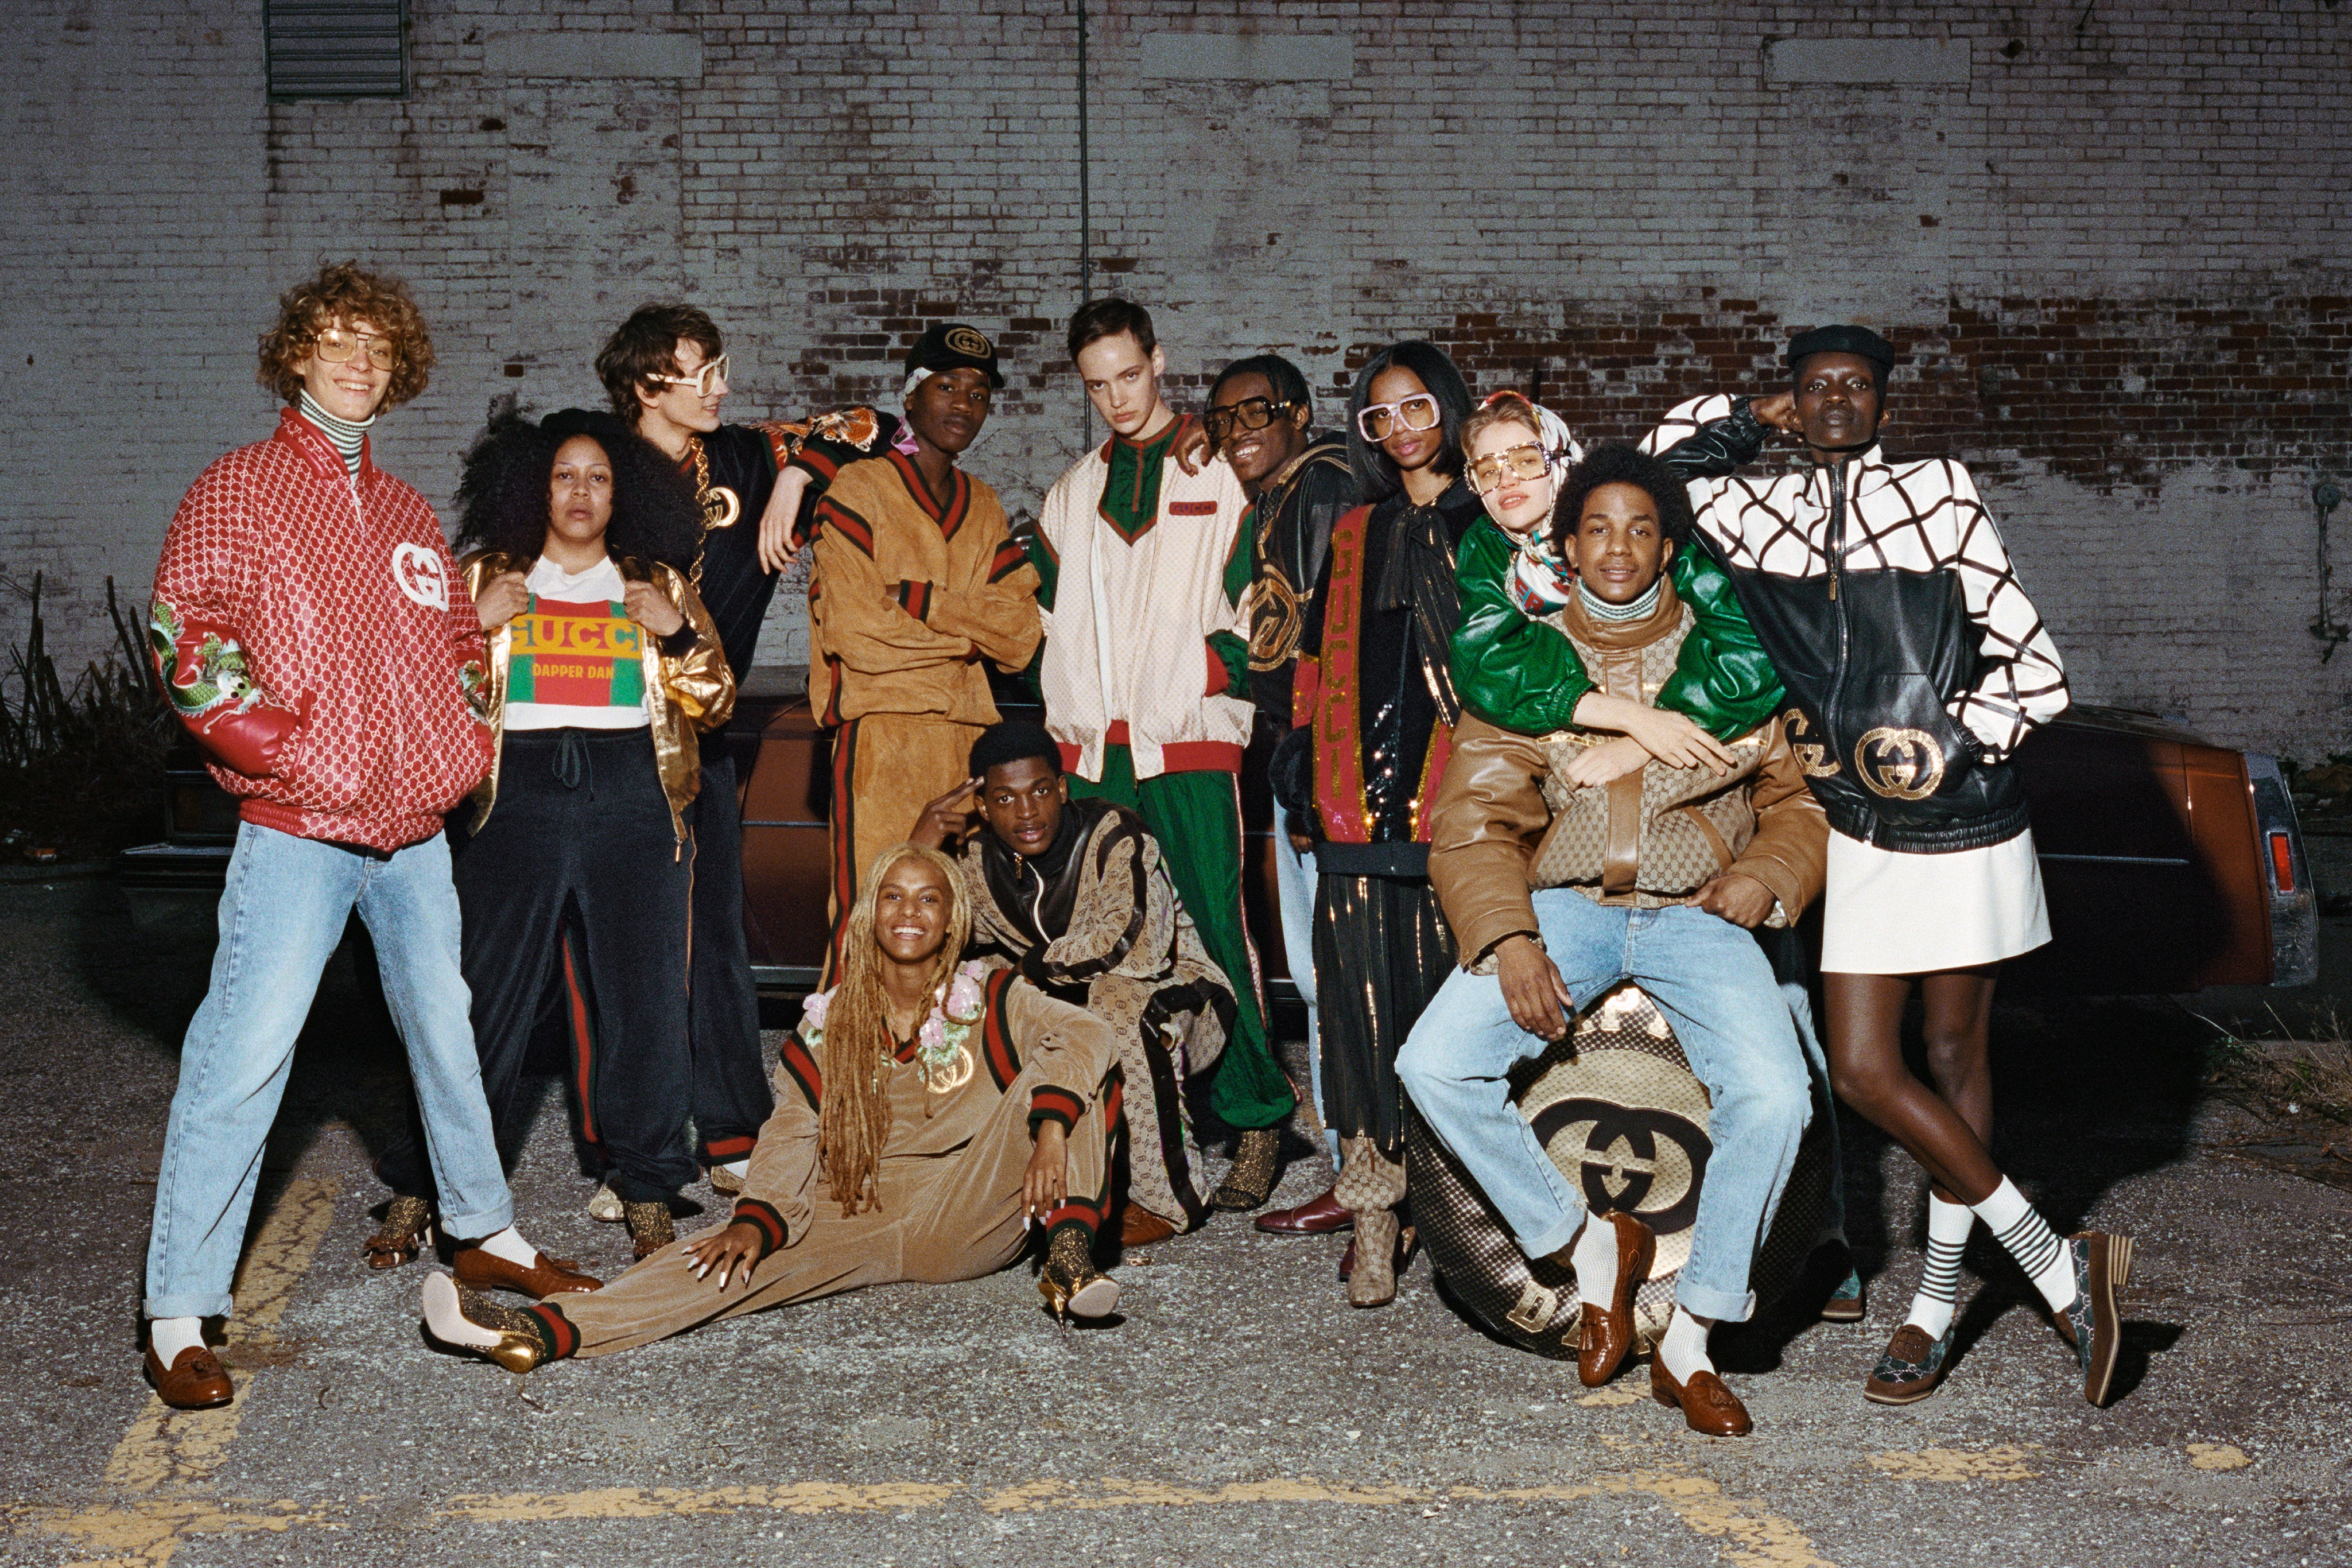 Dapper Dan Graces ‘Project Runway’ With His Expertise In Luxury Streetwear